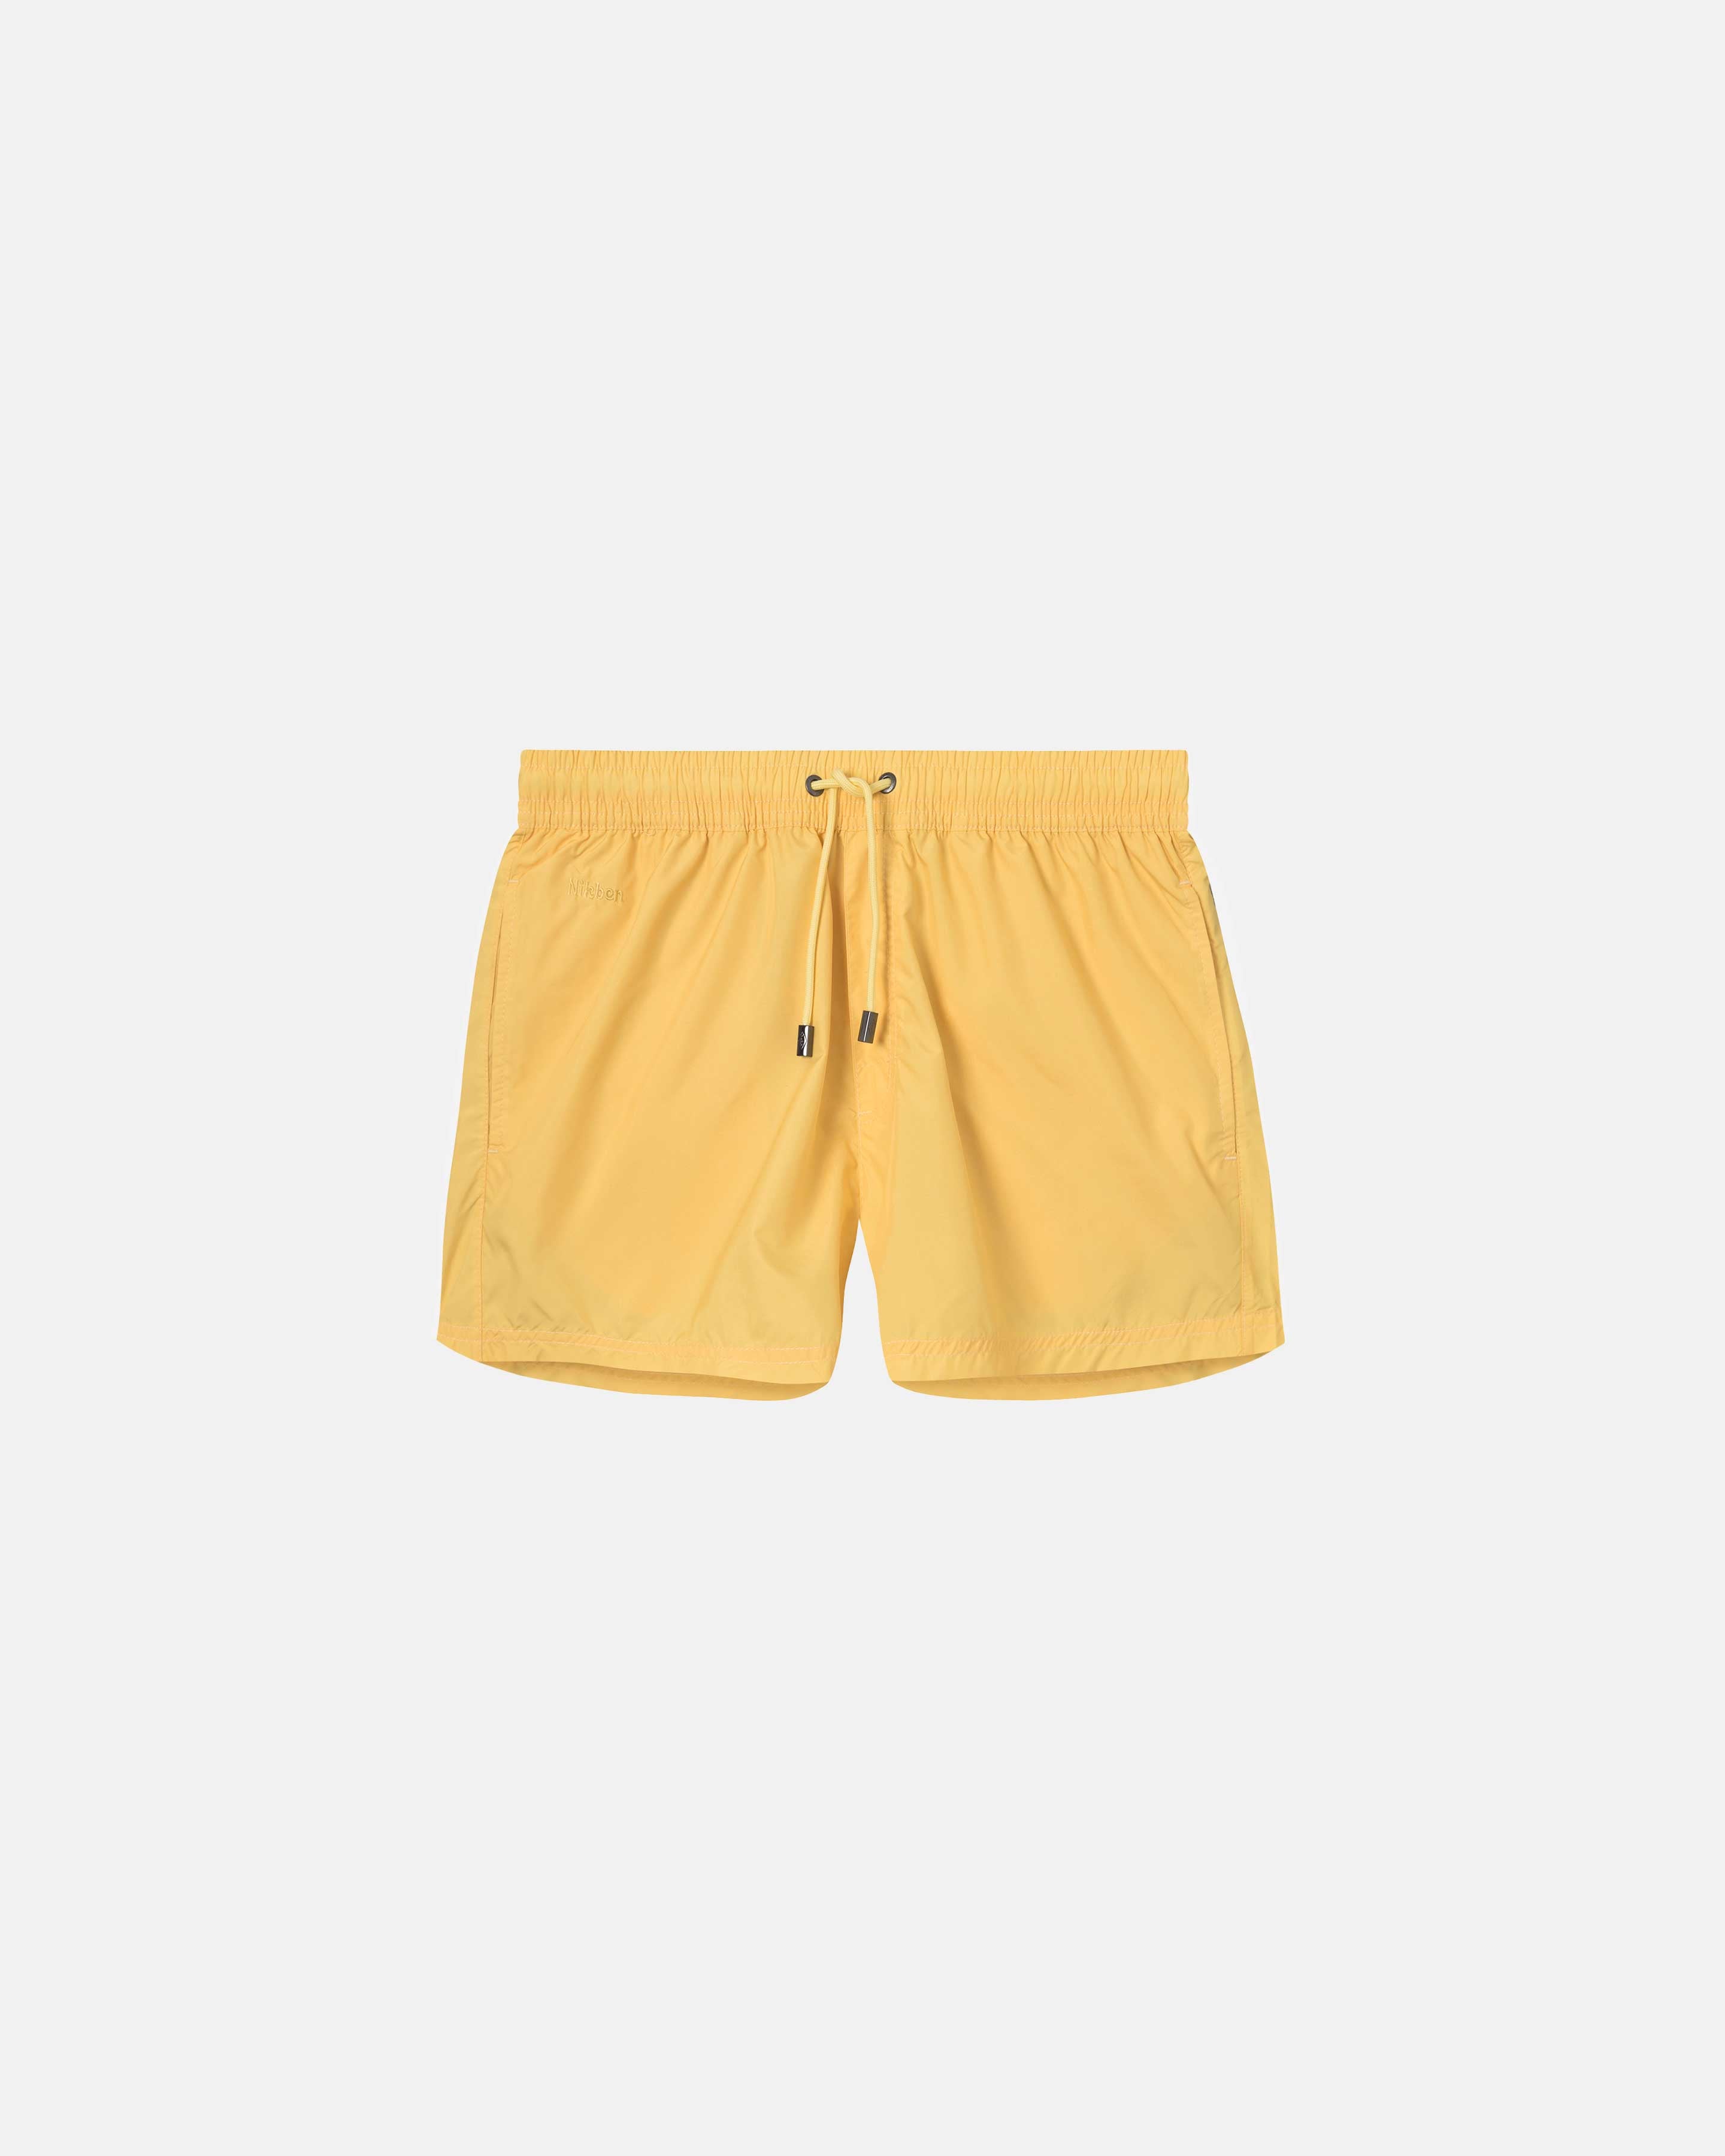 Yellow swim trunks. Mid length with drawstring and two side pockets.